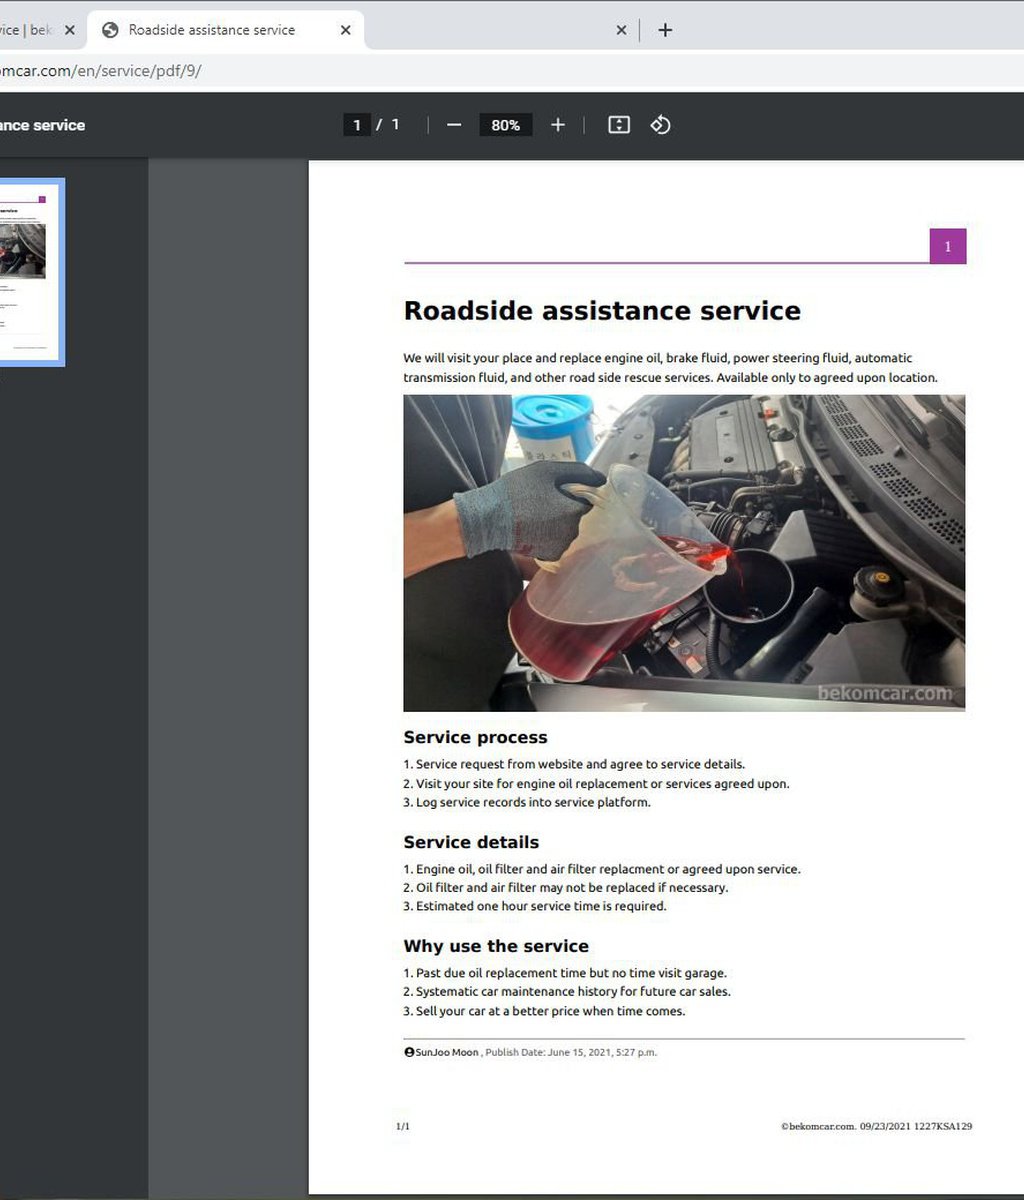 PDF print has been added to service and other pages.|bekomcar.com